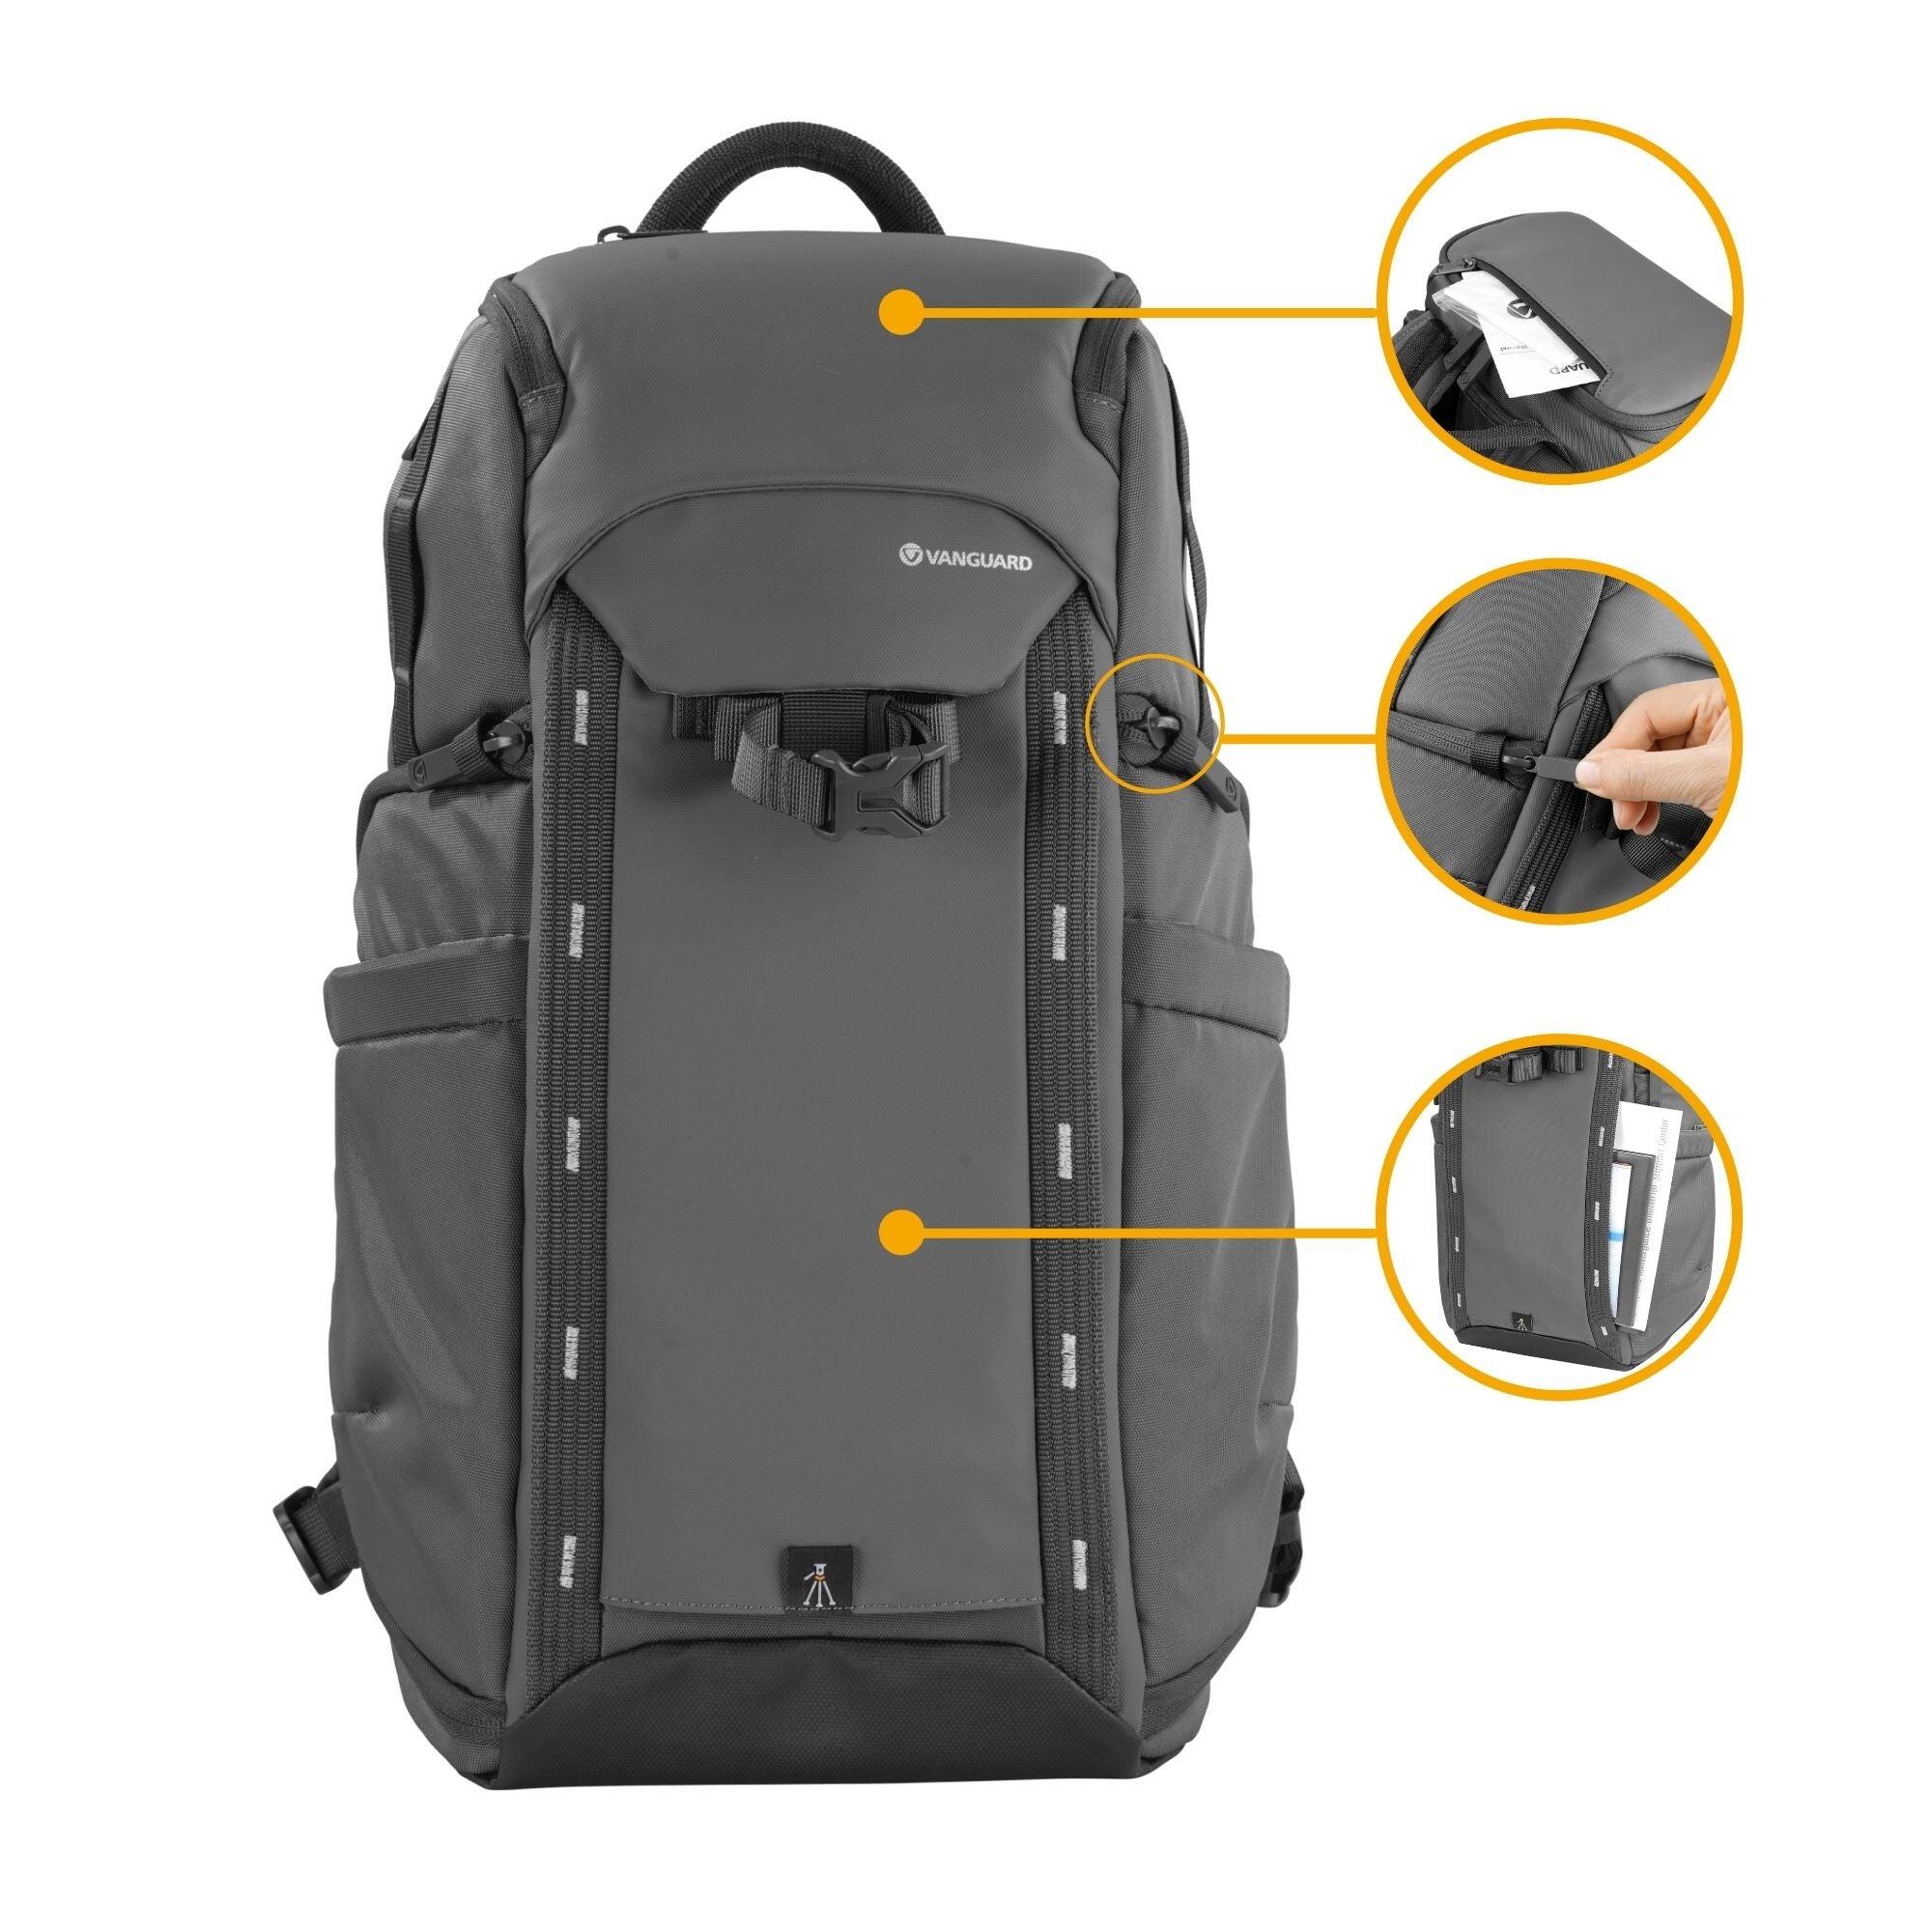 VEO ADAPTOR R48 GY Camera Backpack with USB Port - Grey 4/5